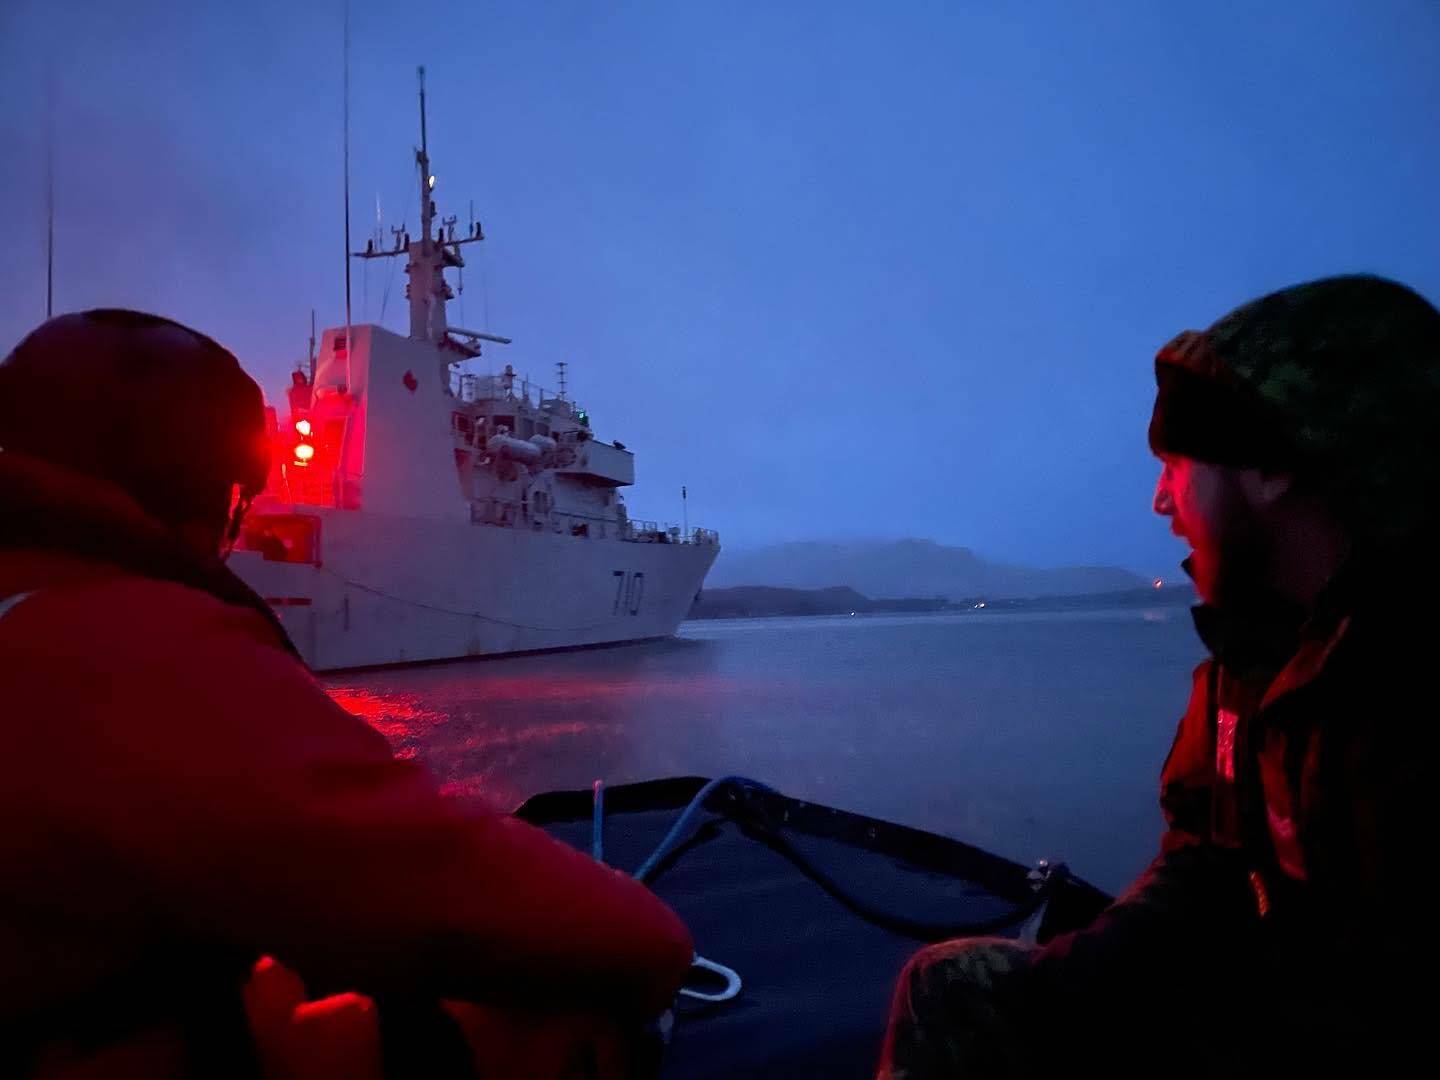 Sailor 3rd Class Travis Coleman, left, and Cpl. Hugo Montpetit look at Her Majesty’s Canadian Ship Brandon as they prepare to go aboard on March 6, 2022 as part of exercise Arctic Edge 2022. (Michael S. Lockett / Juneau Empire)